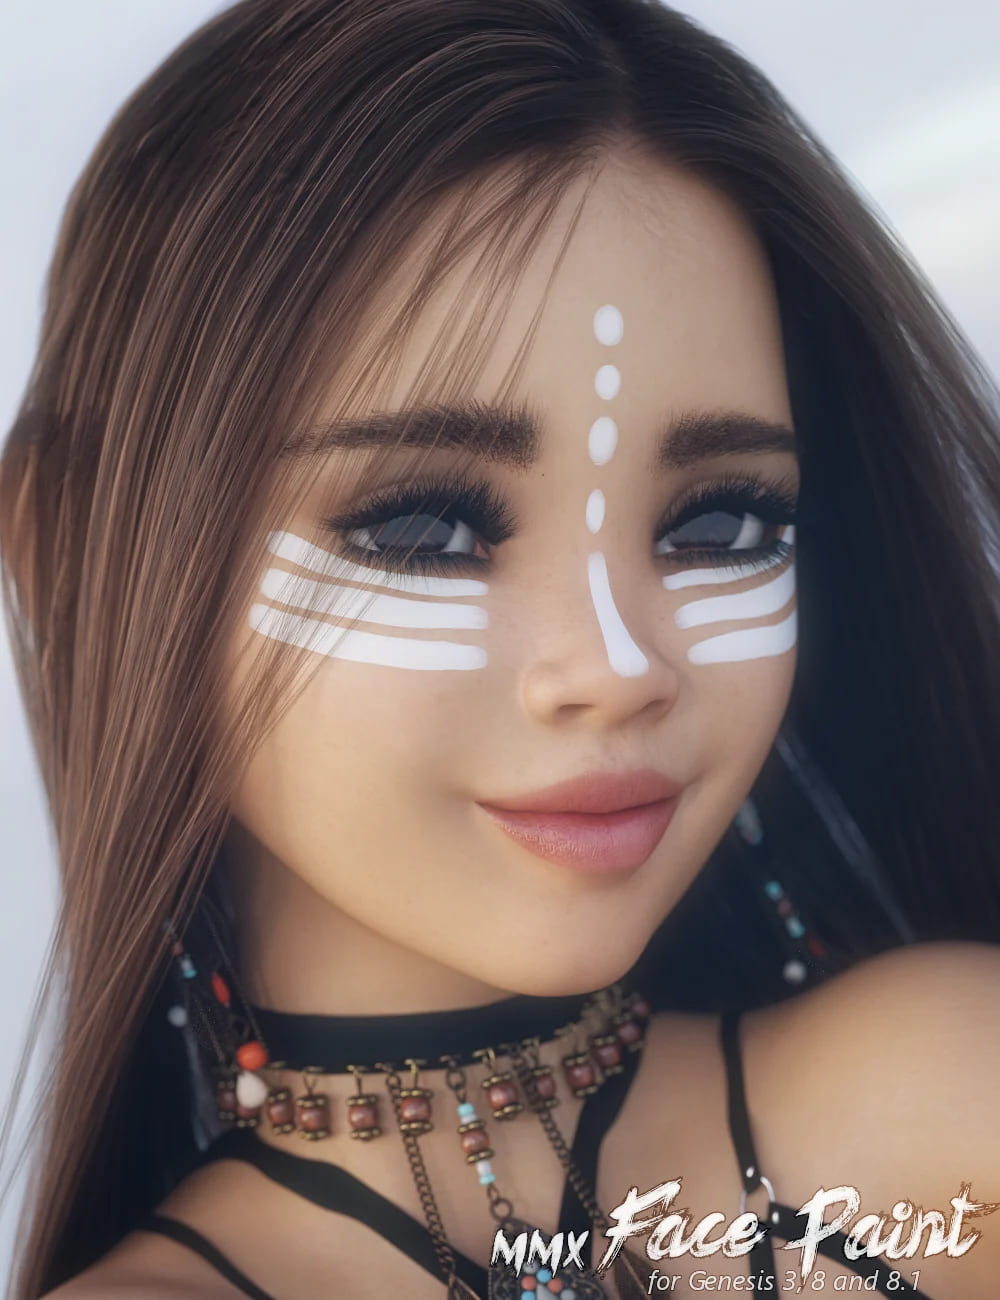 MMX Face Paint for Genesis 3, 8 and 8.1_DAZ3D下载站